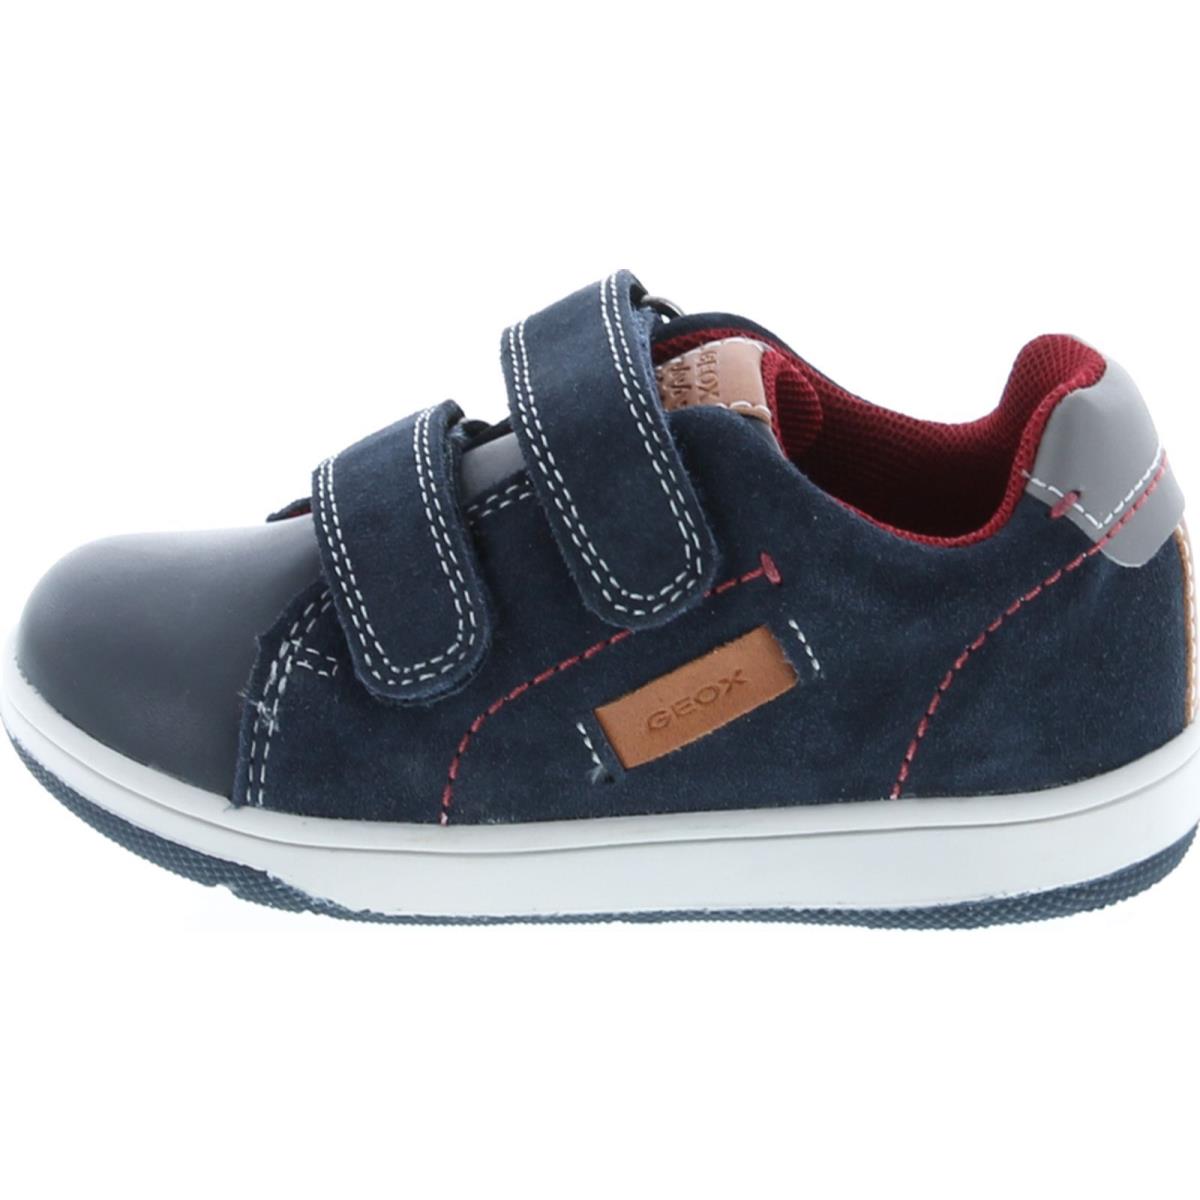 Geox Boys Baby Flick Fashion Shoes